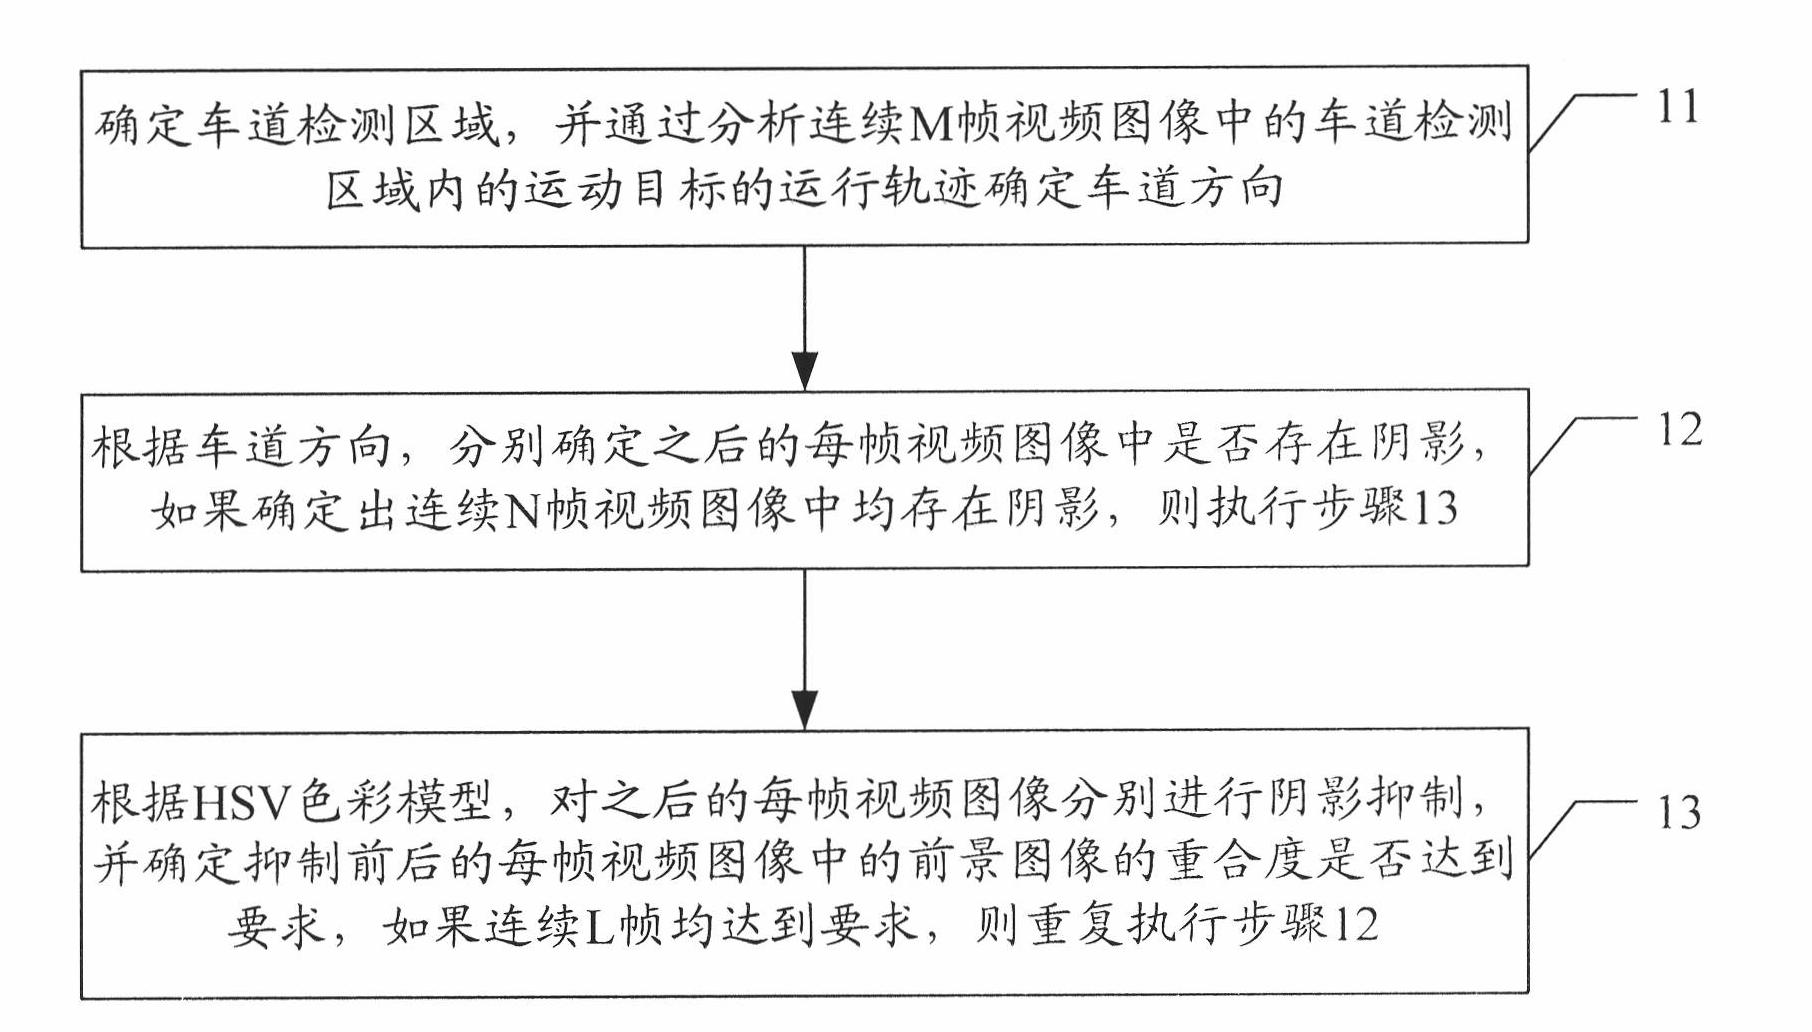 Method and device for processing video image under intelligent transportation monitoring scene